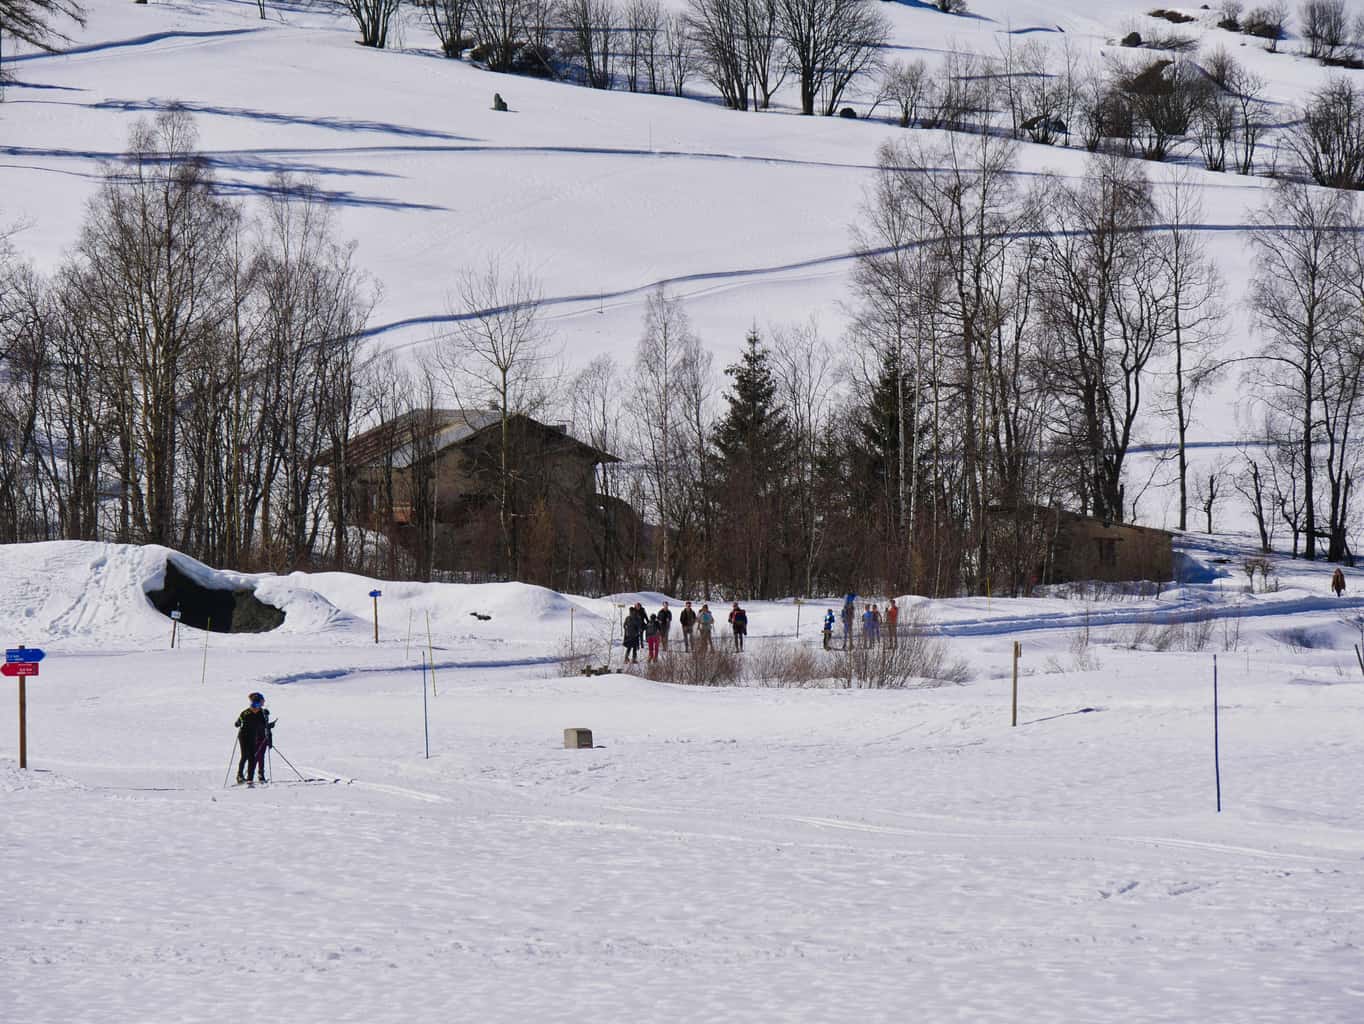 Nordic Ski Area in Peisey-Nancroix covered in snow with people skiing and walking